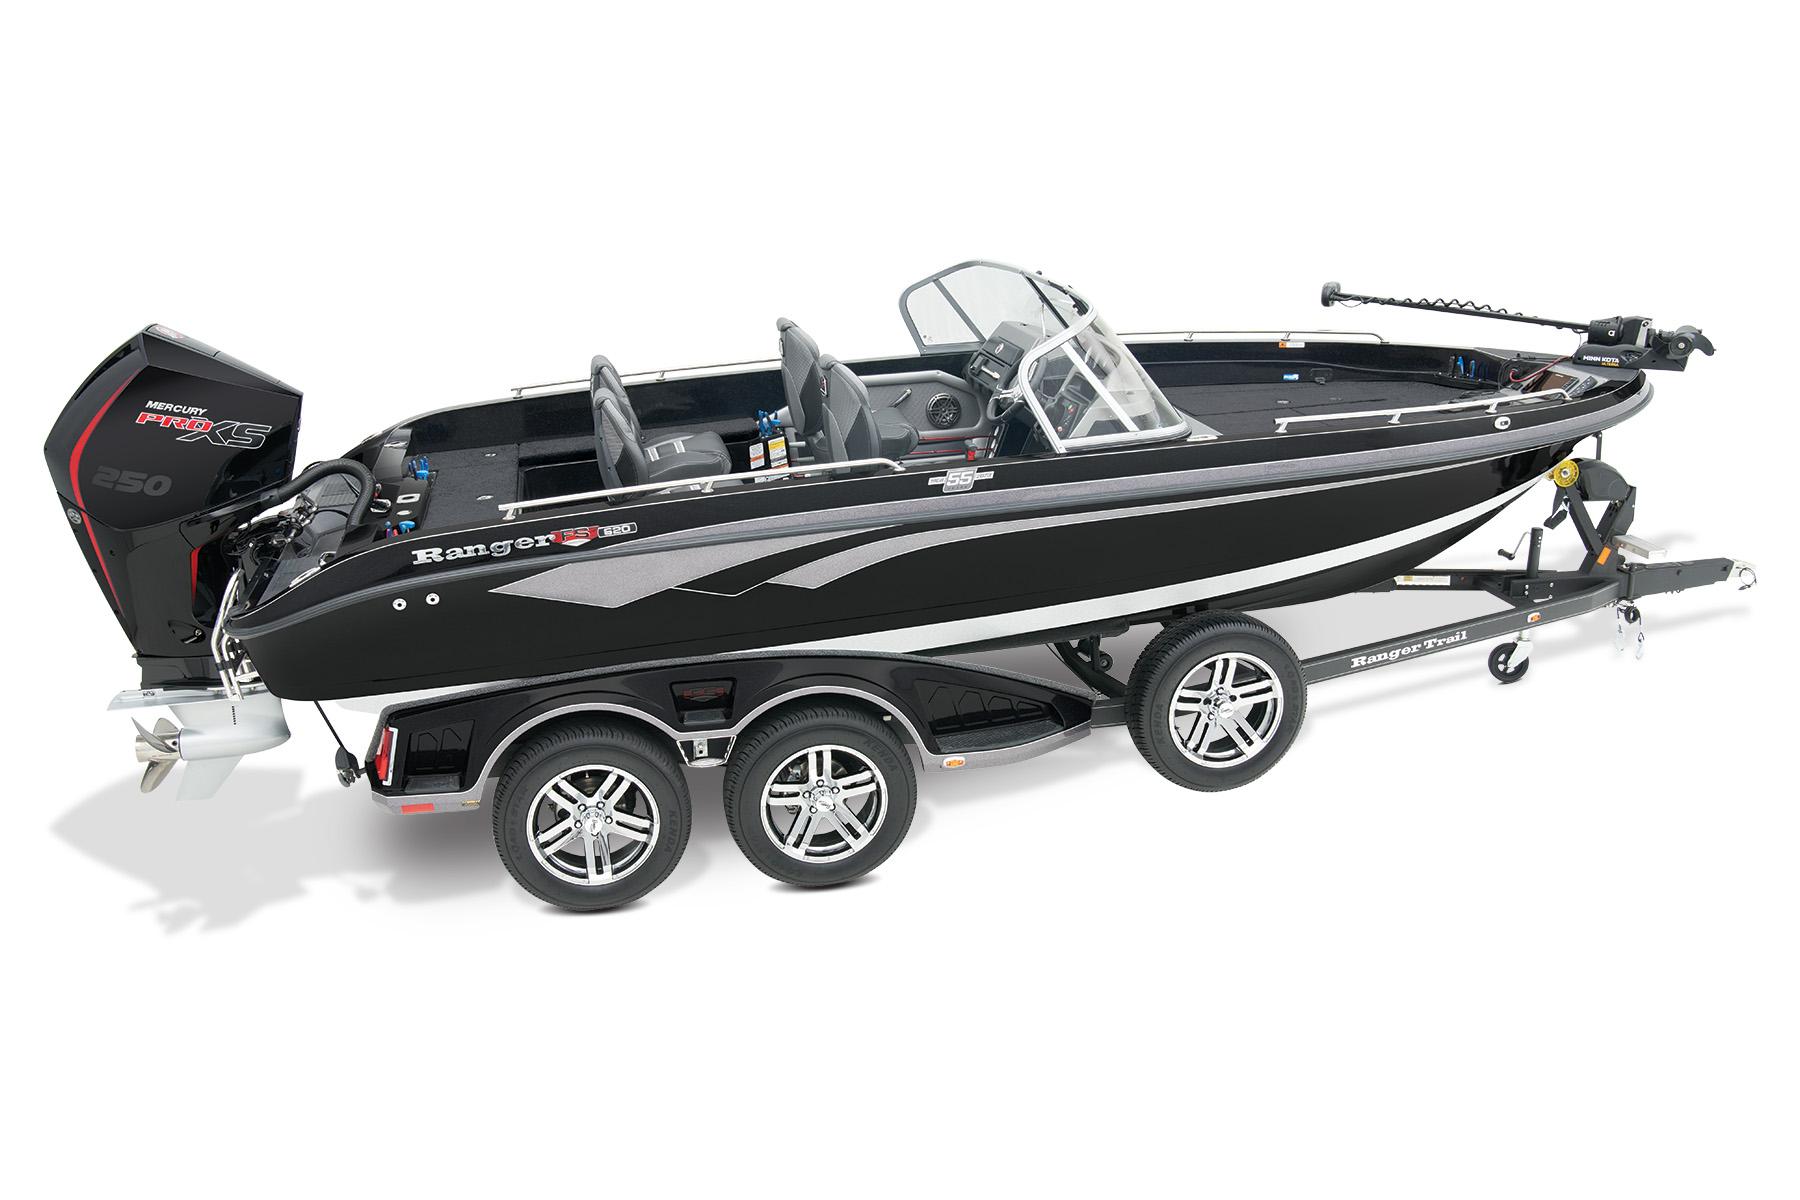 Manufacturer Provided Image: Ranger 620FS Ranger Cup Equipped